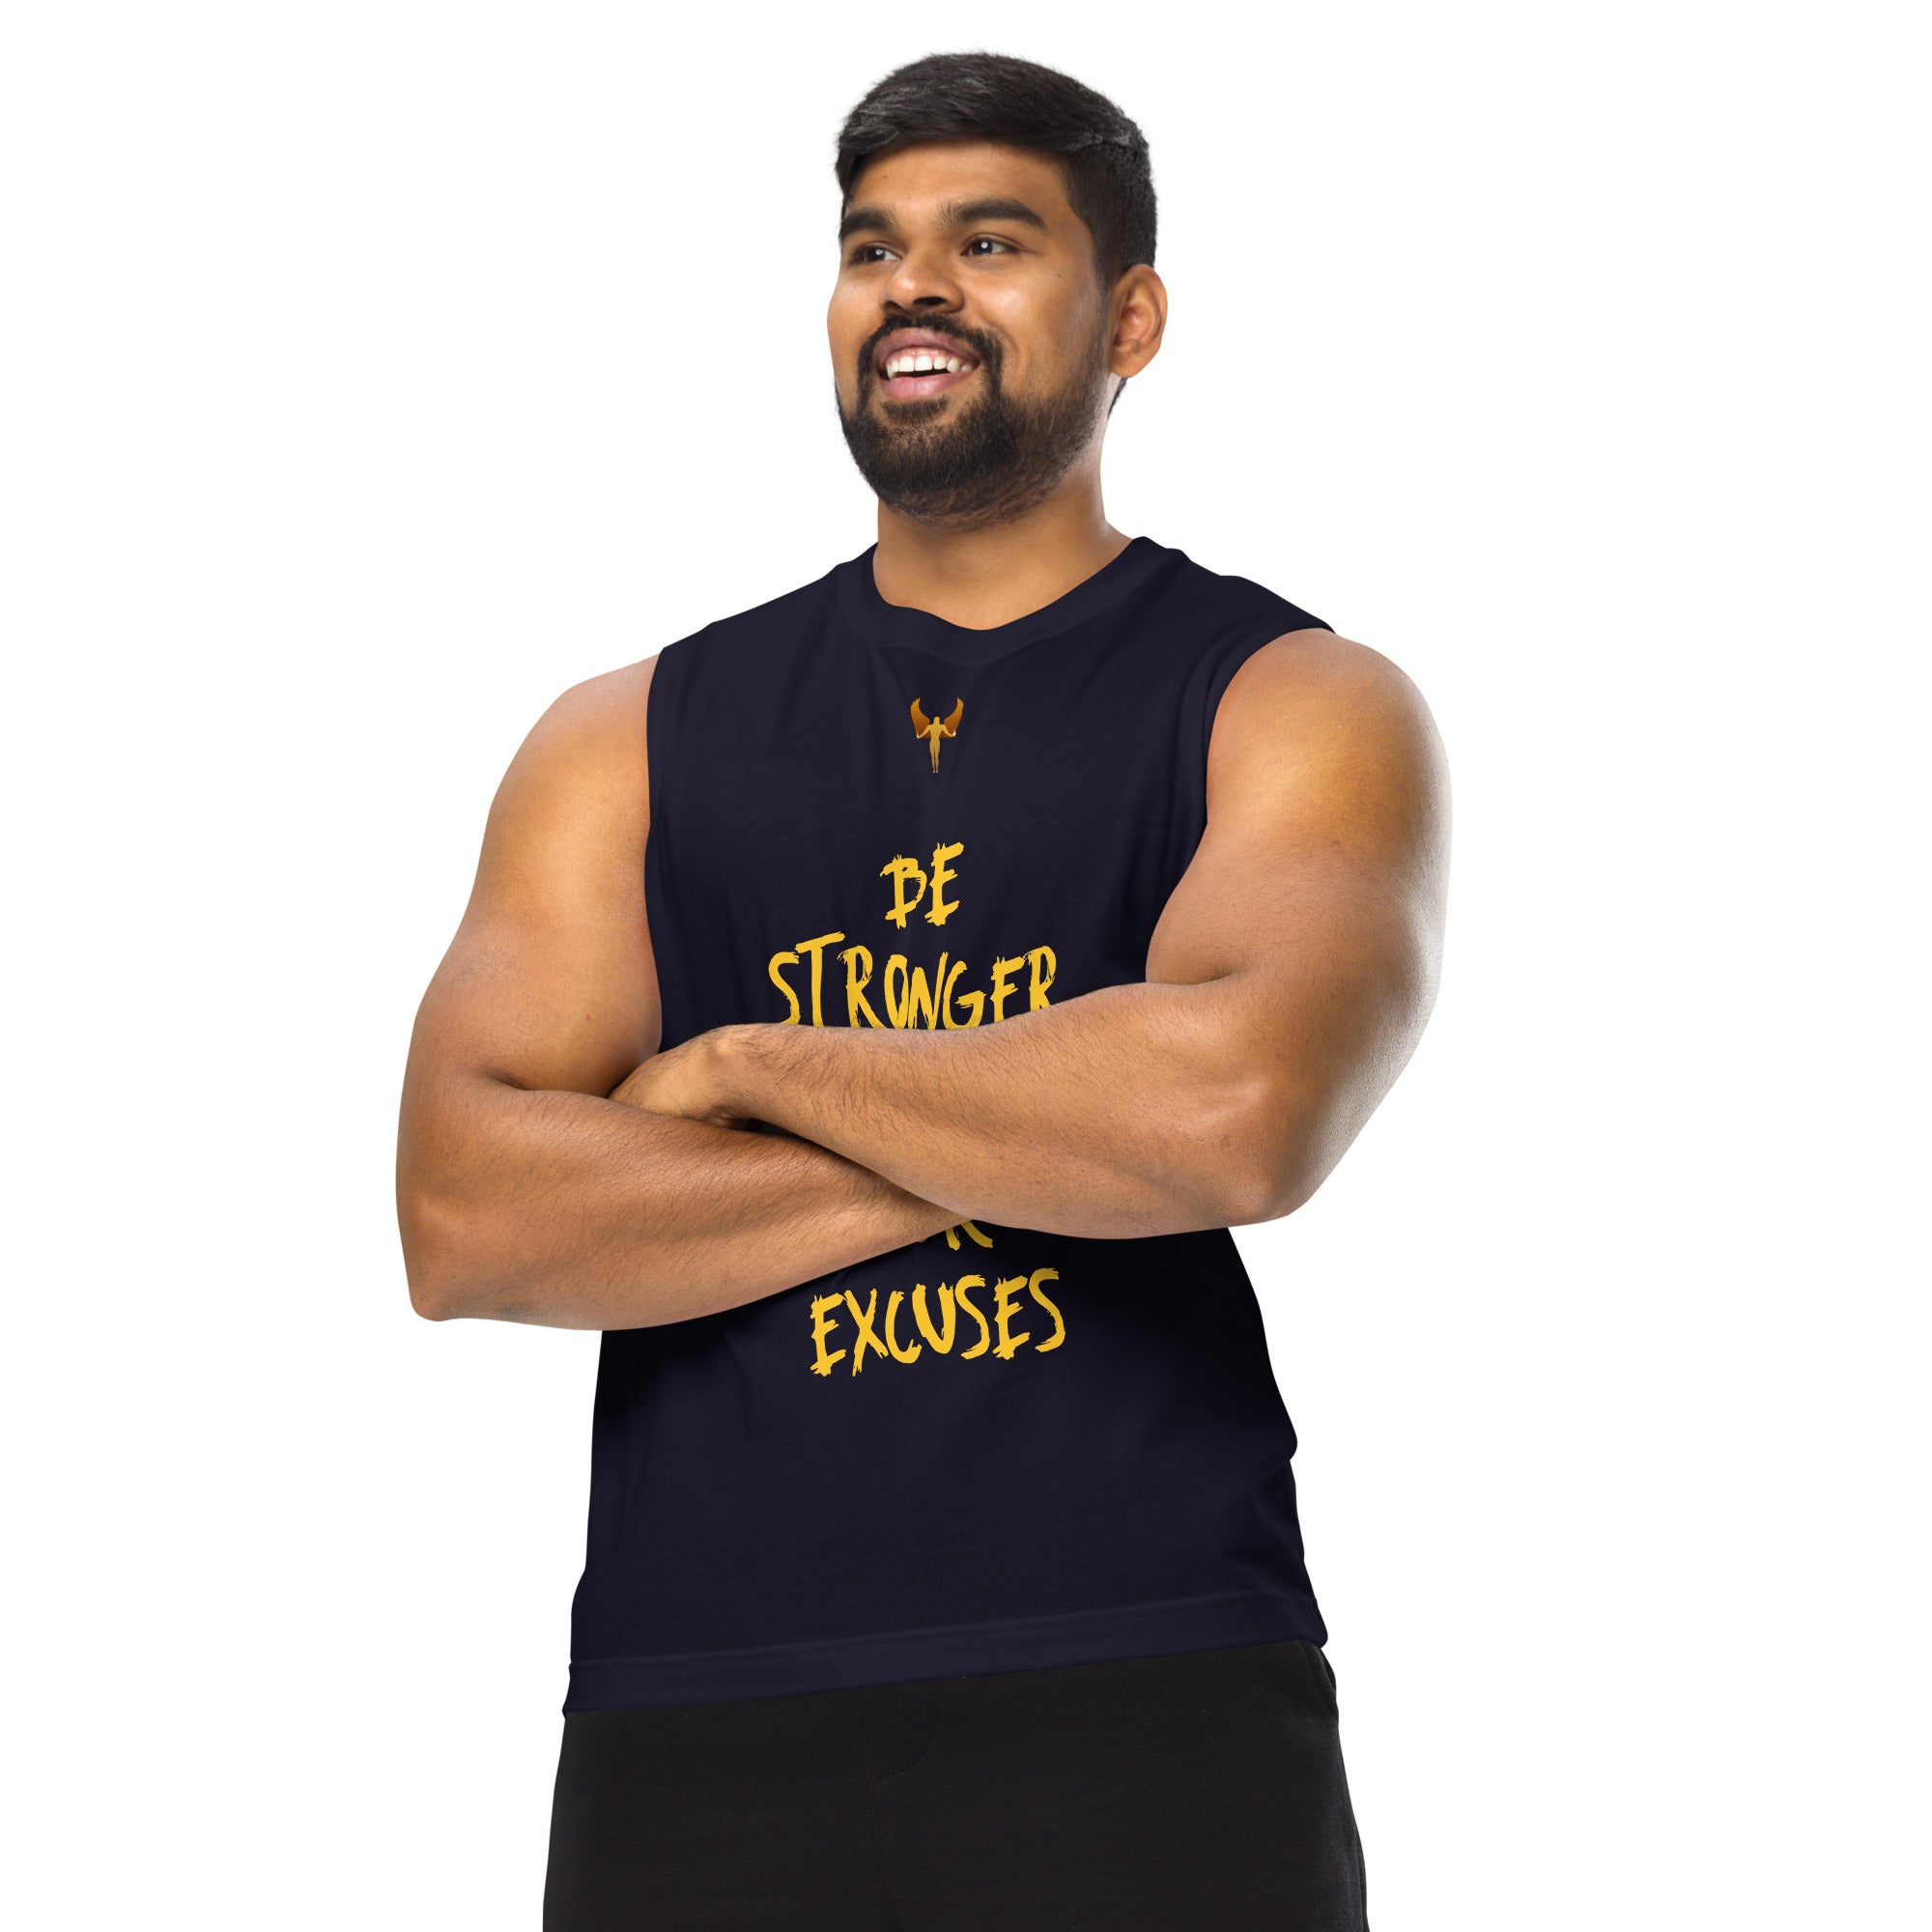 Be Stronger Than Your Excuses - Muscle Shirt